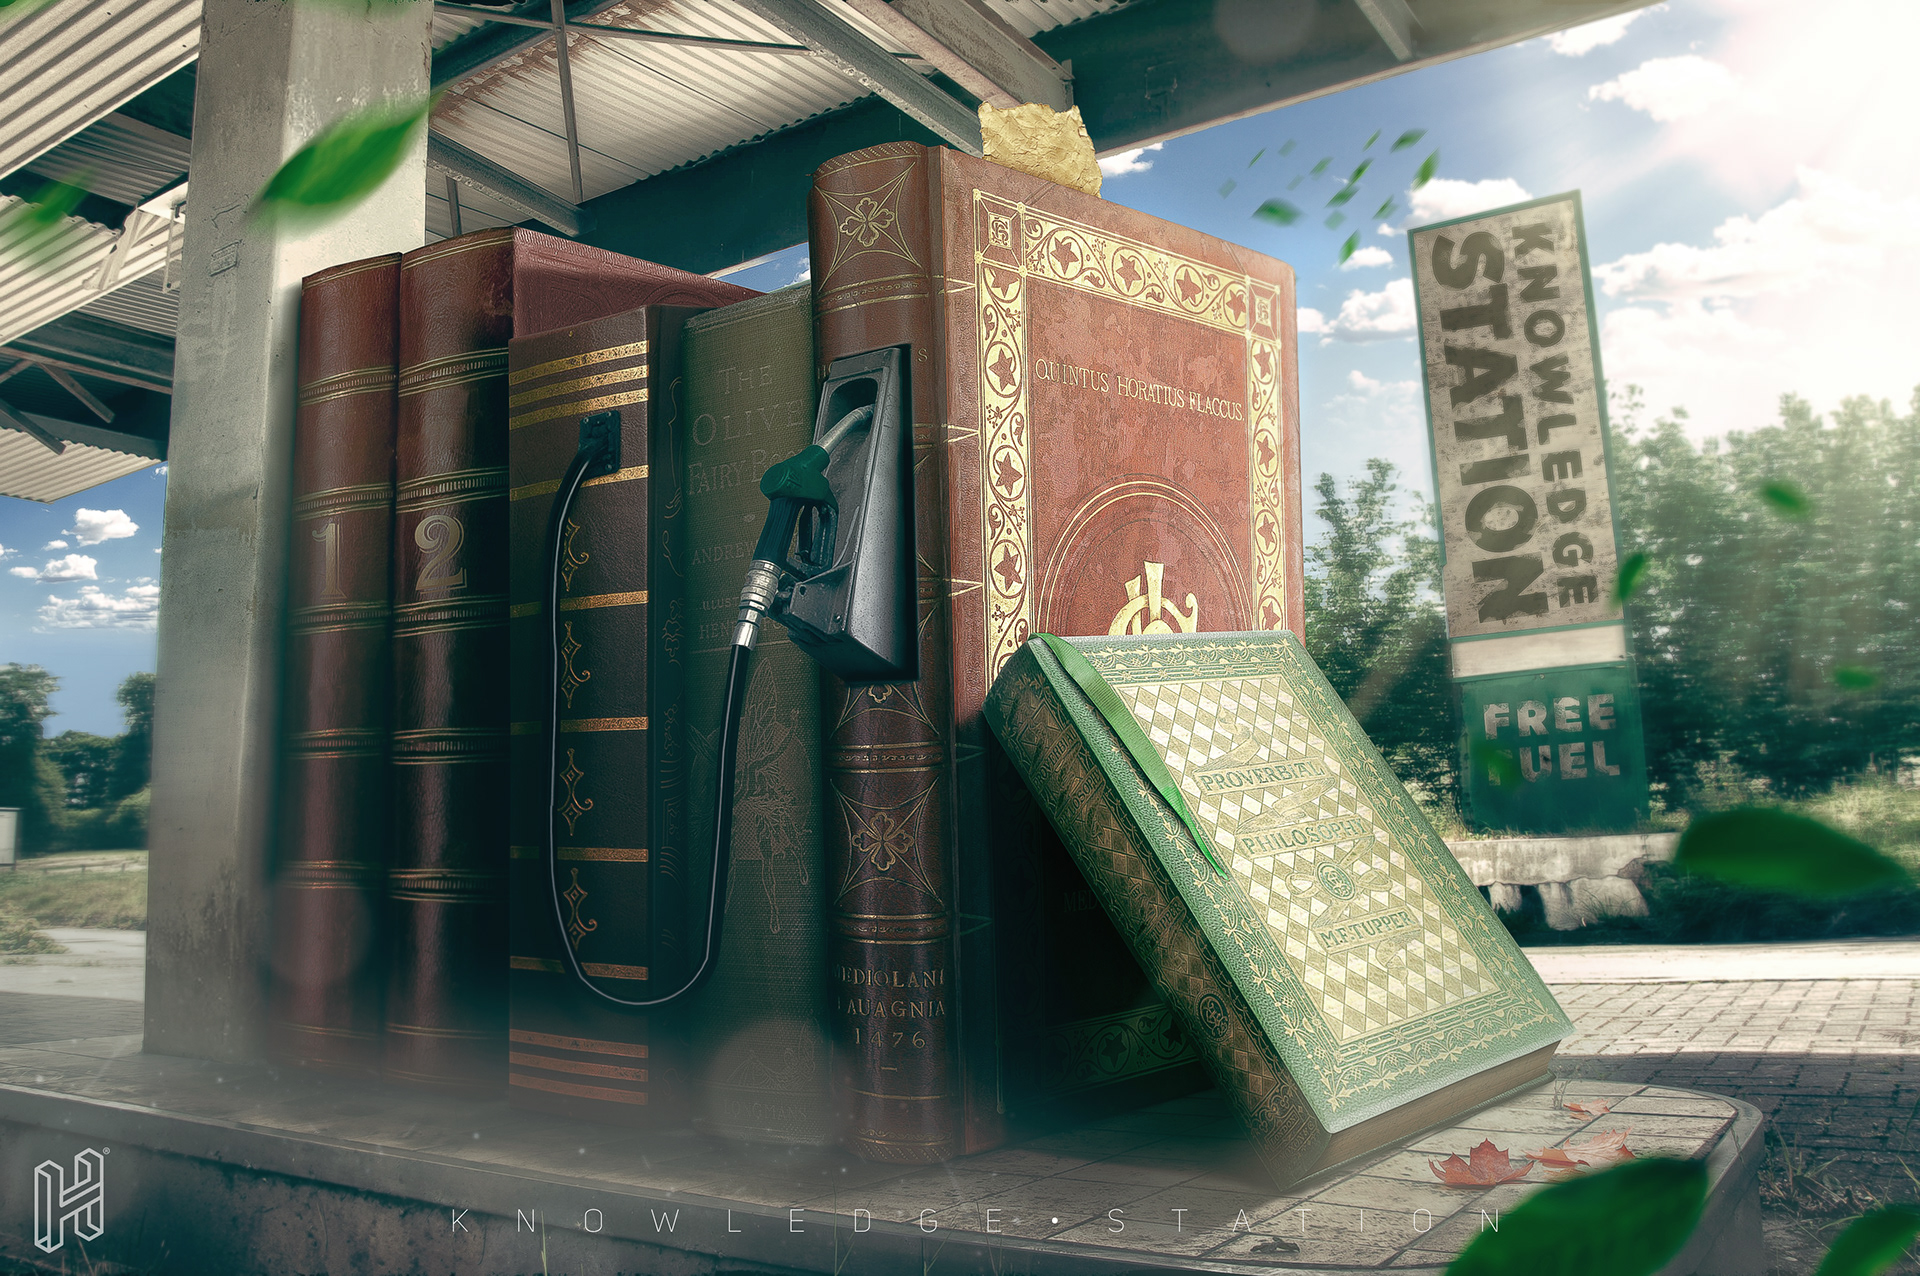 knowledge station on Behance